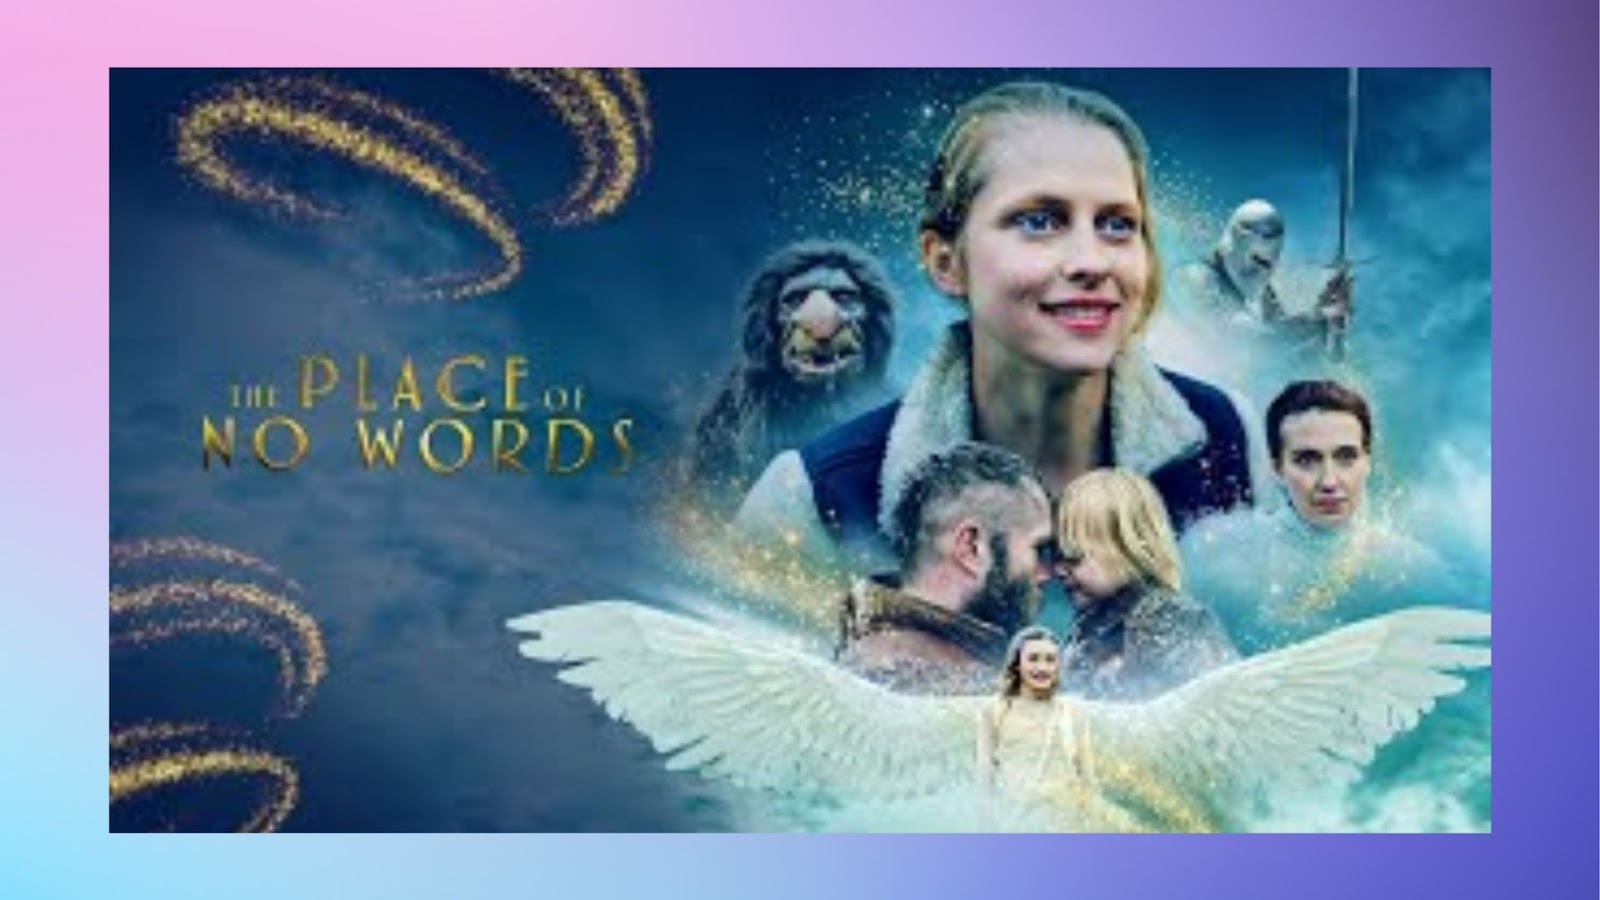 Christian Movies on Hulu - Place of No Words